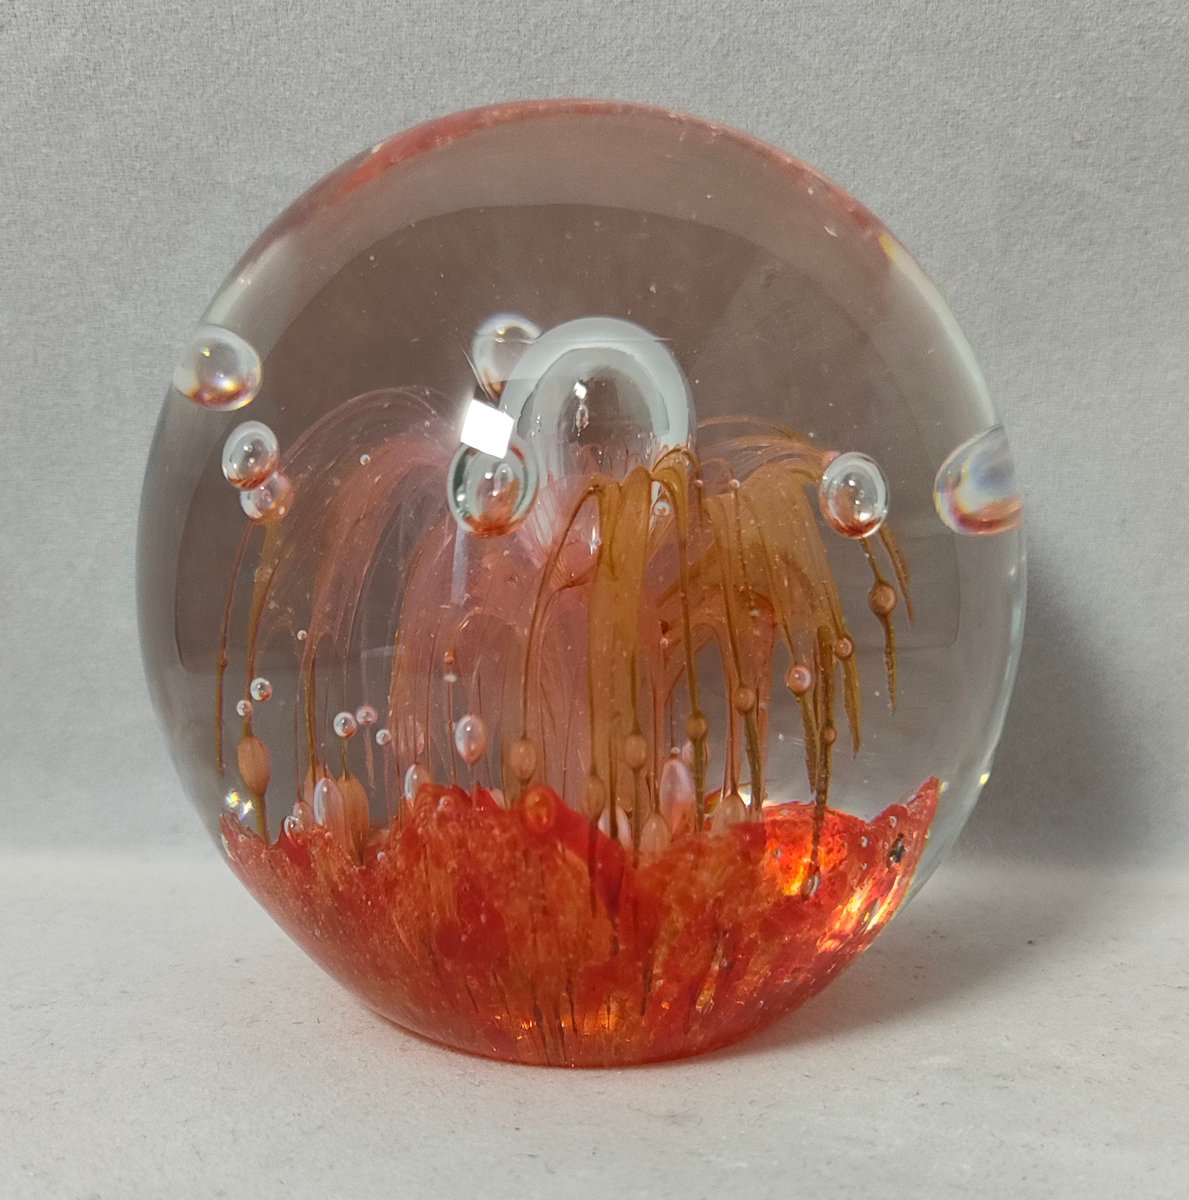 Excited to share the latest addition to my #etsy shop: Studio Glass Large Paperweight etsy.me/46Dr7rb #studioglassweight #glasspaperweight #collectableweight #glass #silverdragonfinds